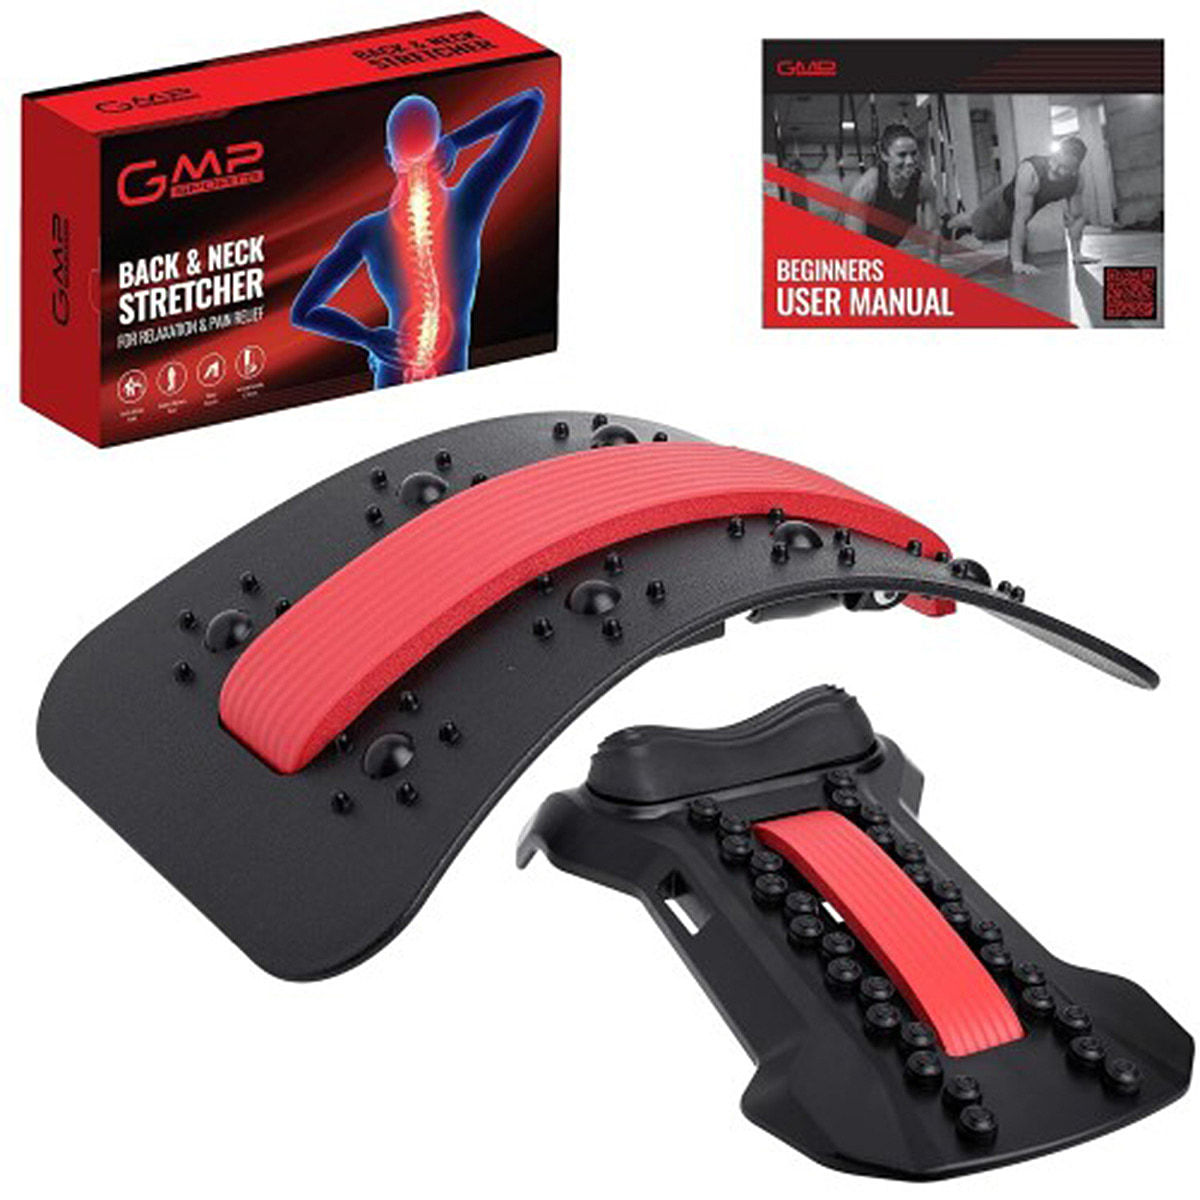 GMP SPORTS 2-in-1 Back & Neck Stretcher Posture Corrector Massager Lumbar Support Pain Tension